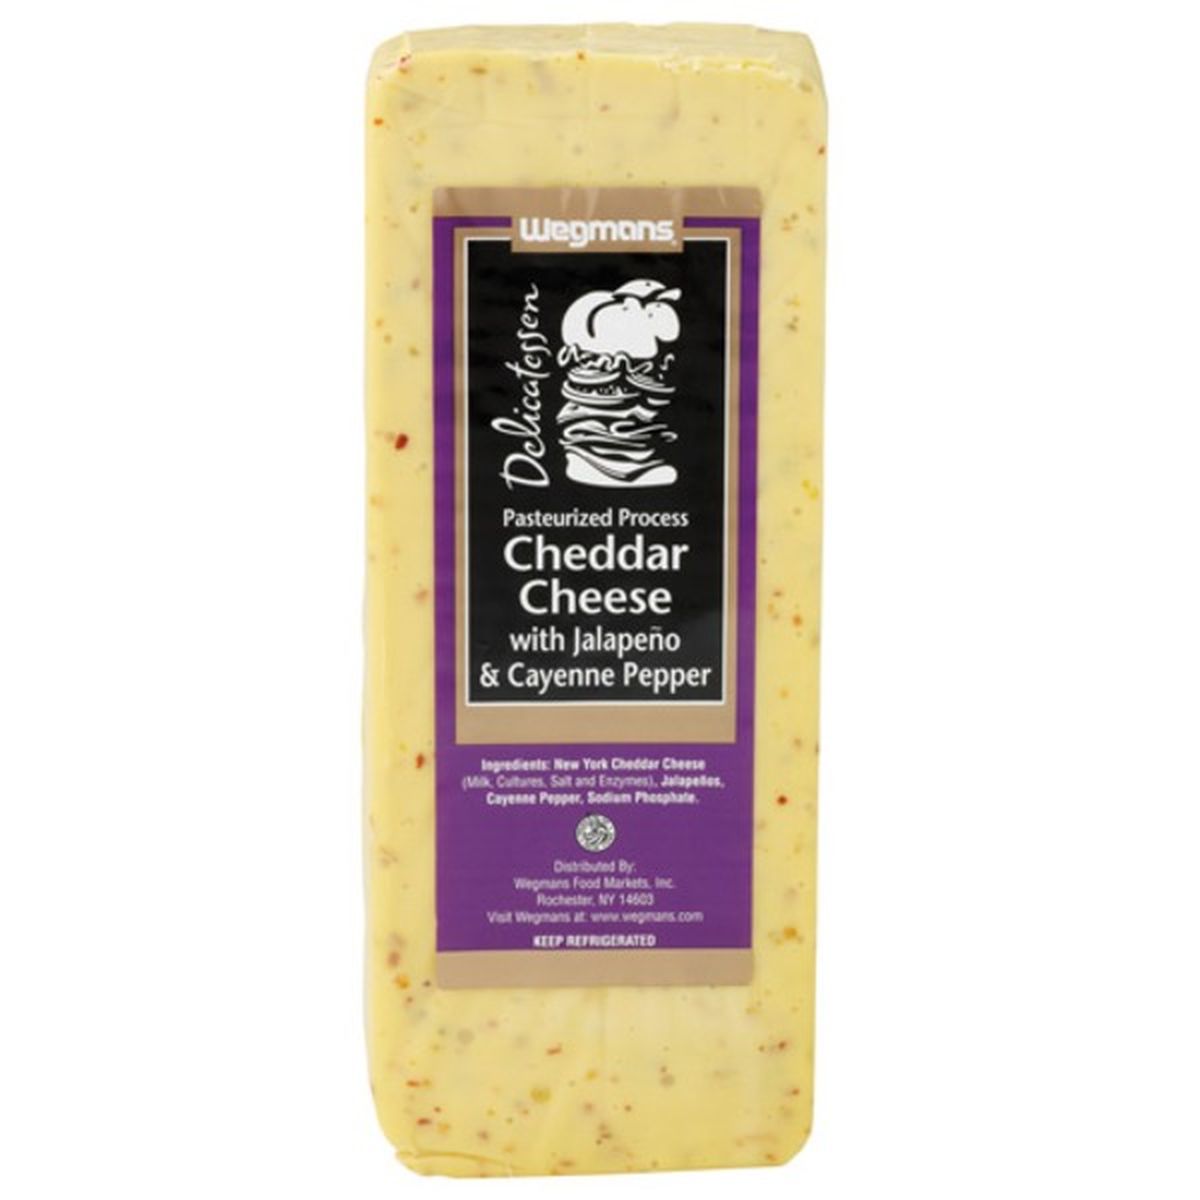 Calories in Wegmans Jalapeno & Cayenne Pepper Cheddar Cheese